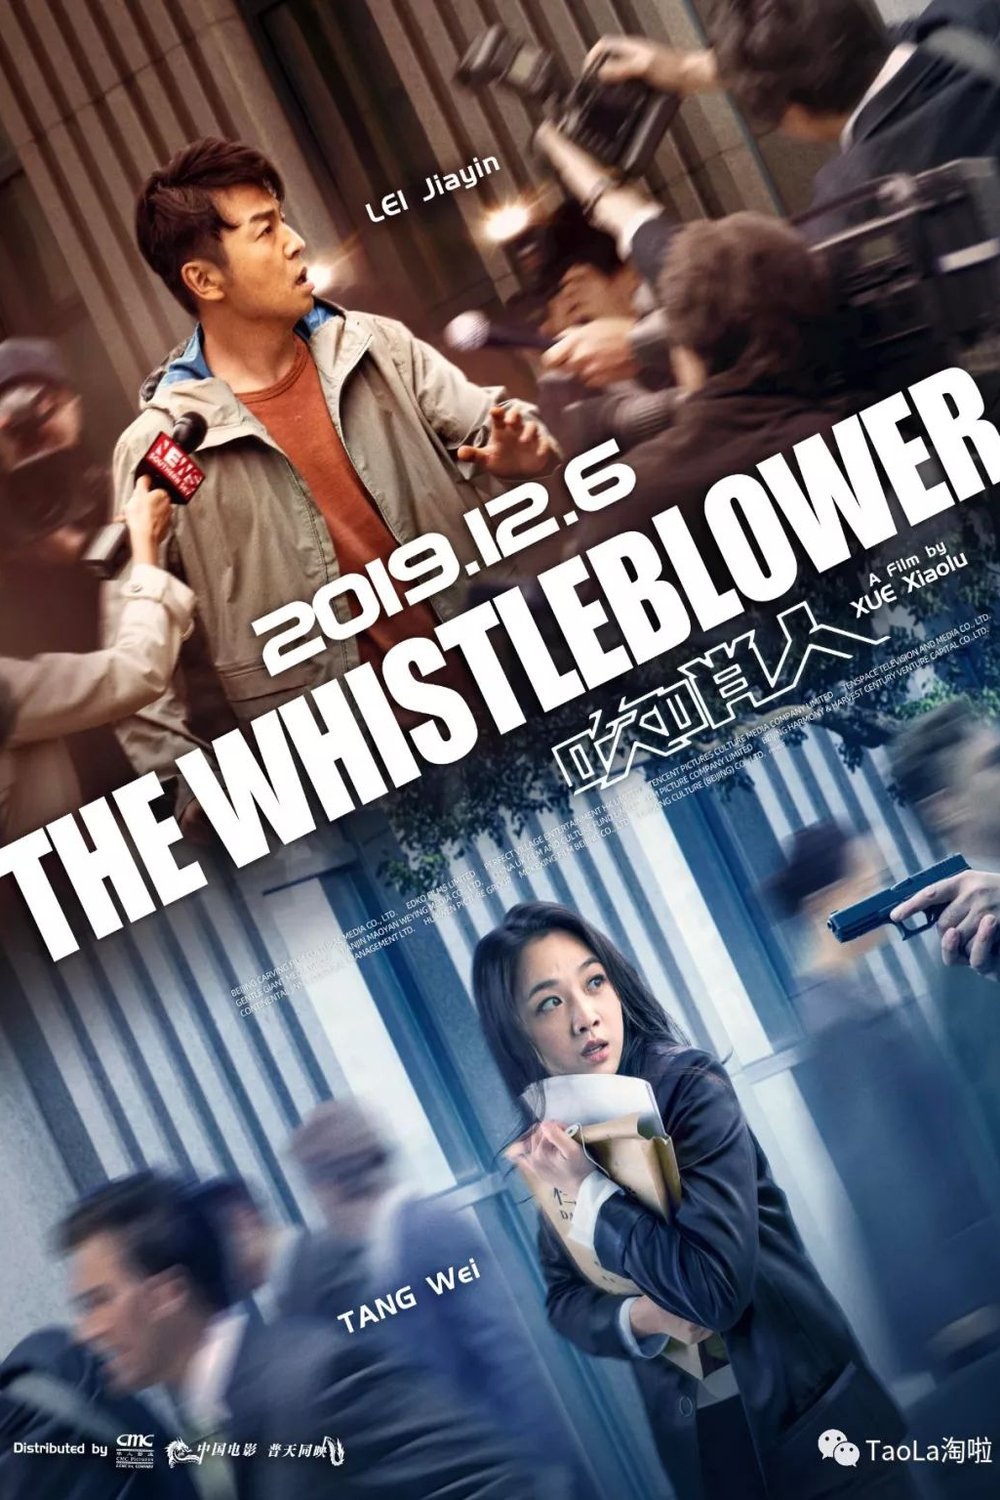 Poster of the movie The Whistleblower